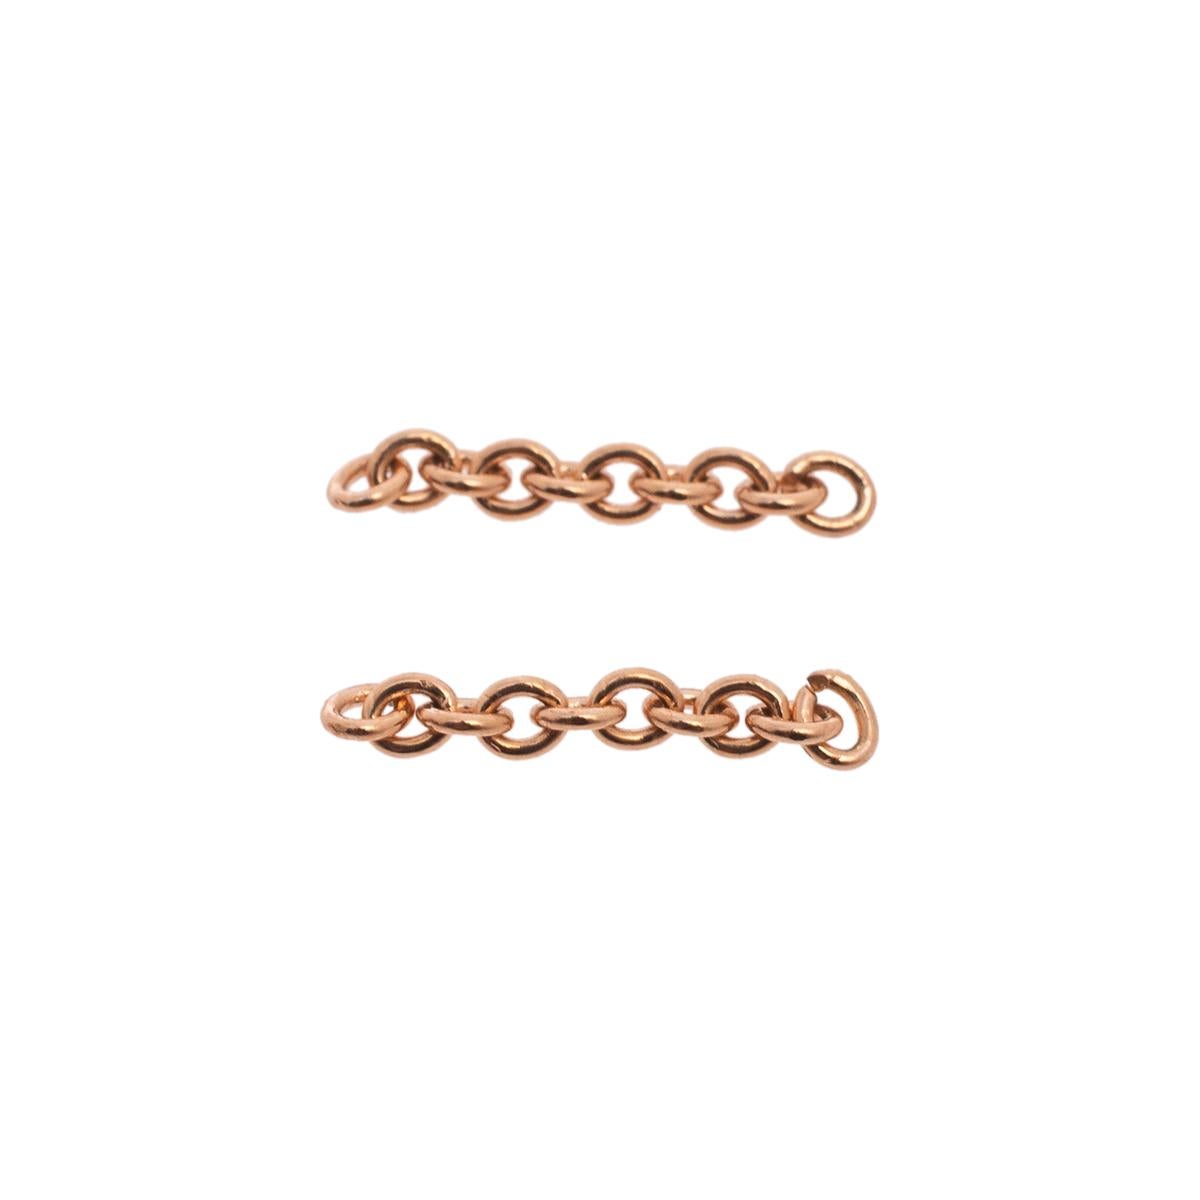 Celebrate timeless love with this bracelet from Cartier's Love collection. It is made from 18k rose gold and the chain holds two magnificent hoops interlocked with one another. Both the rings carry the iconic screw motifs which are a signature of